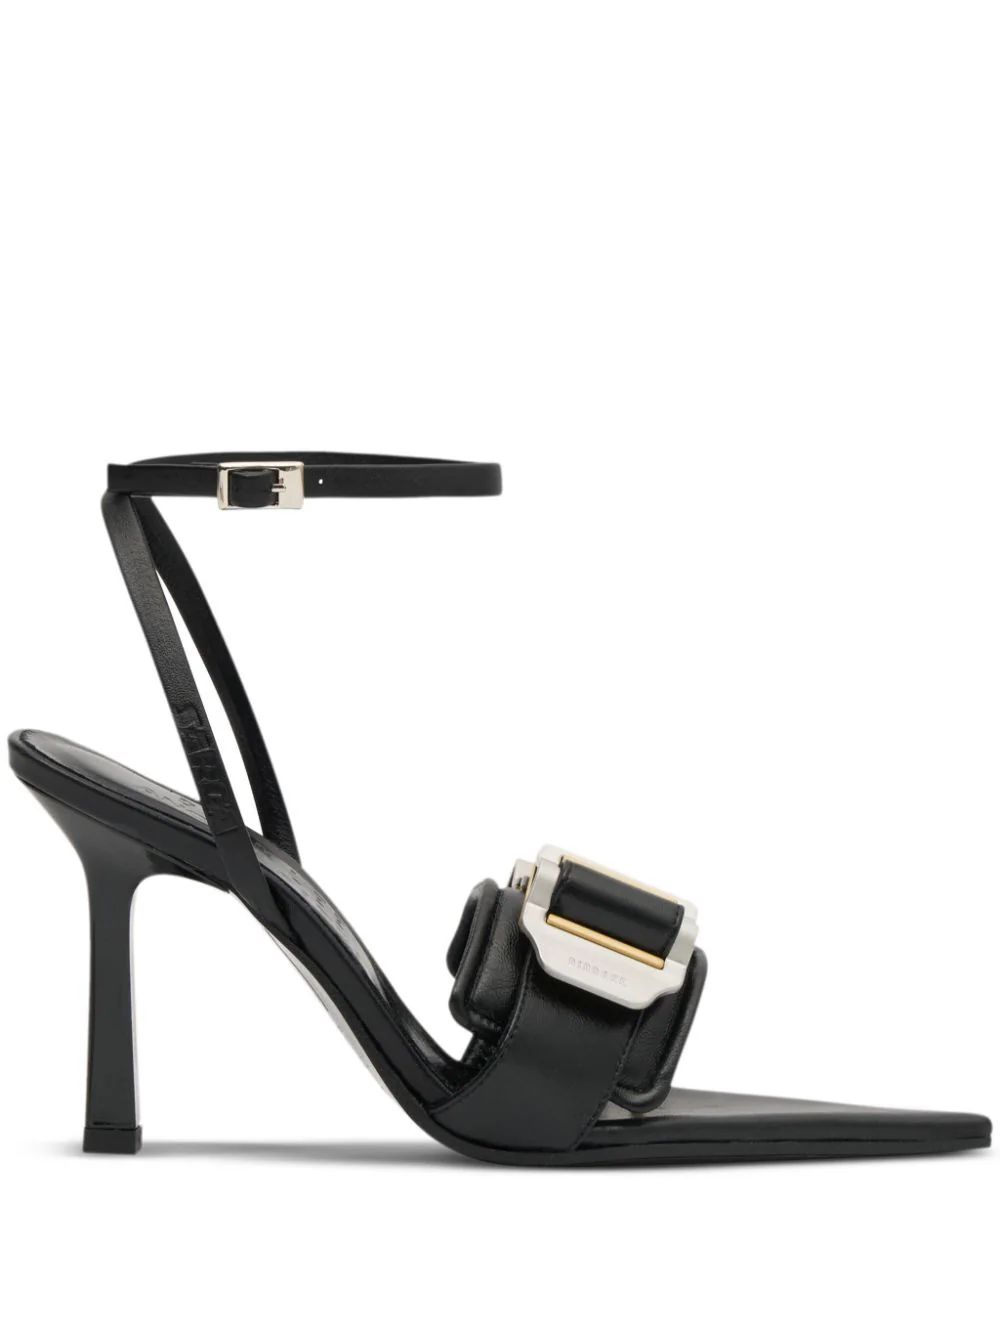 The DetailsDion Lee100mm buckle-detail leather sandals ImportedHighlightsblack leather/lambskin d... | Farfetch Global